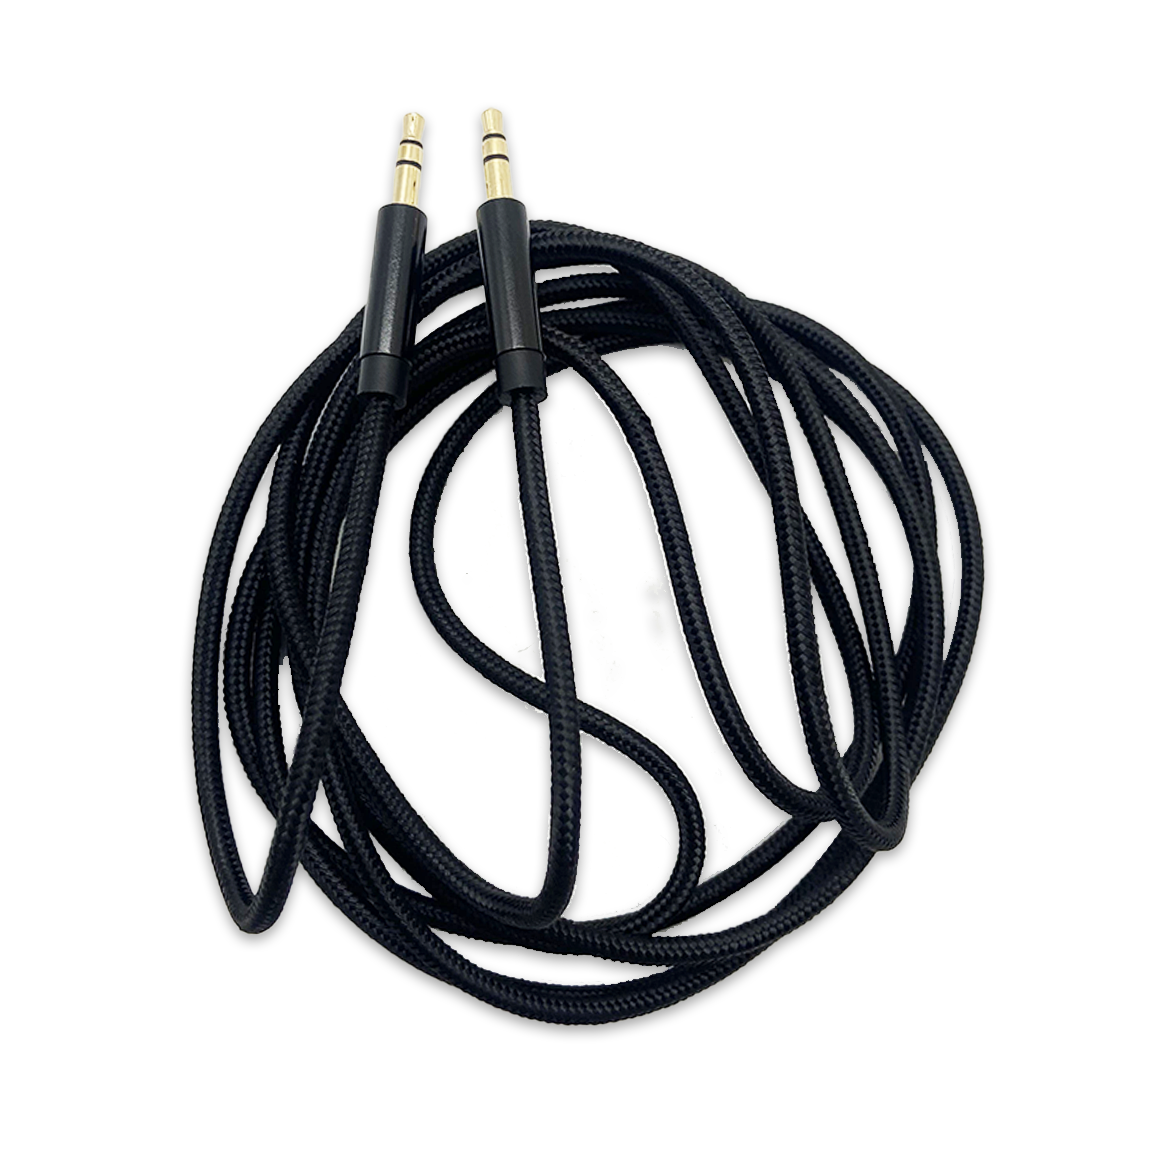 Auxiliary Audio Cable 7FT - 3 Pieces Per Pack 24637